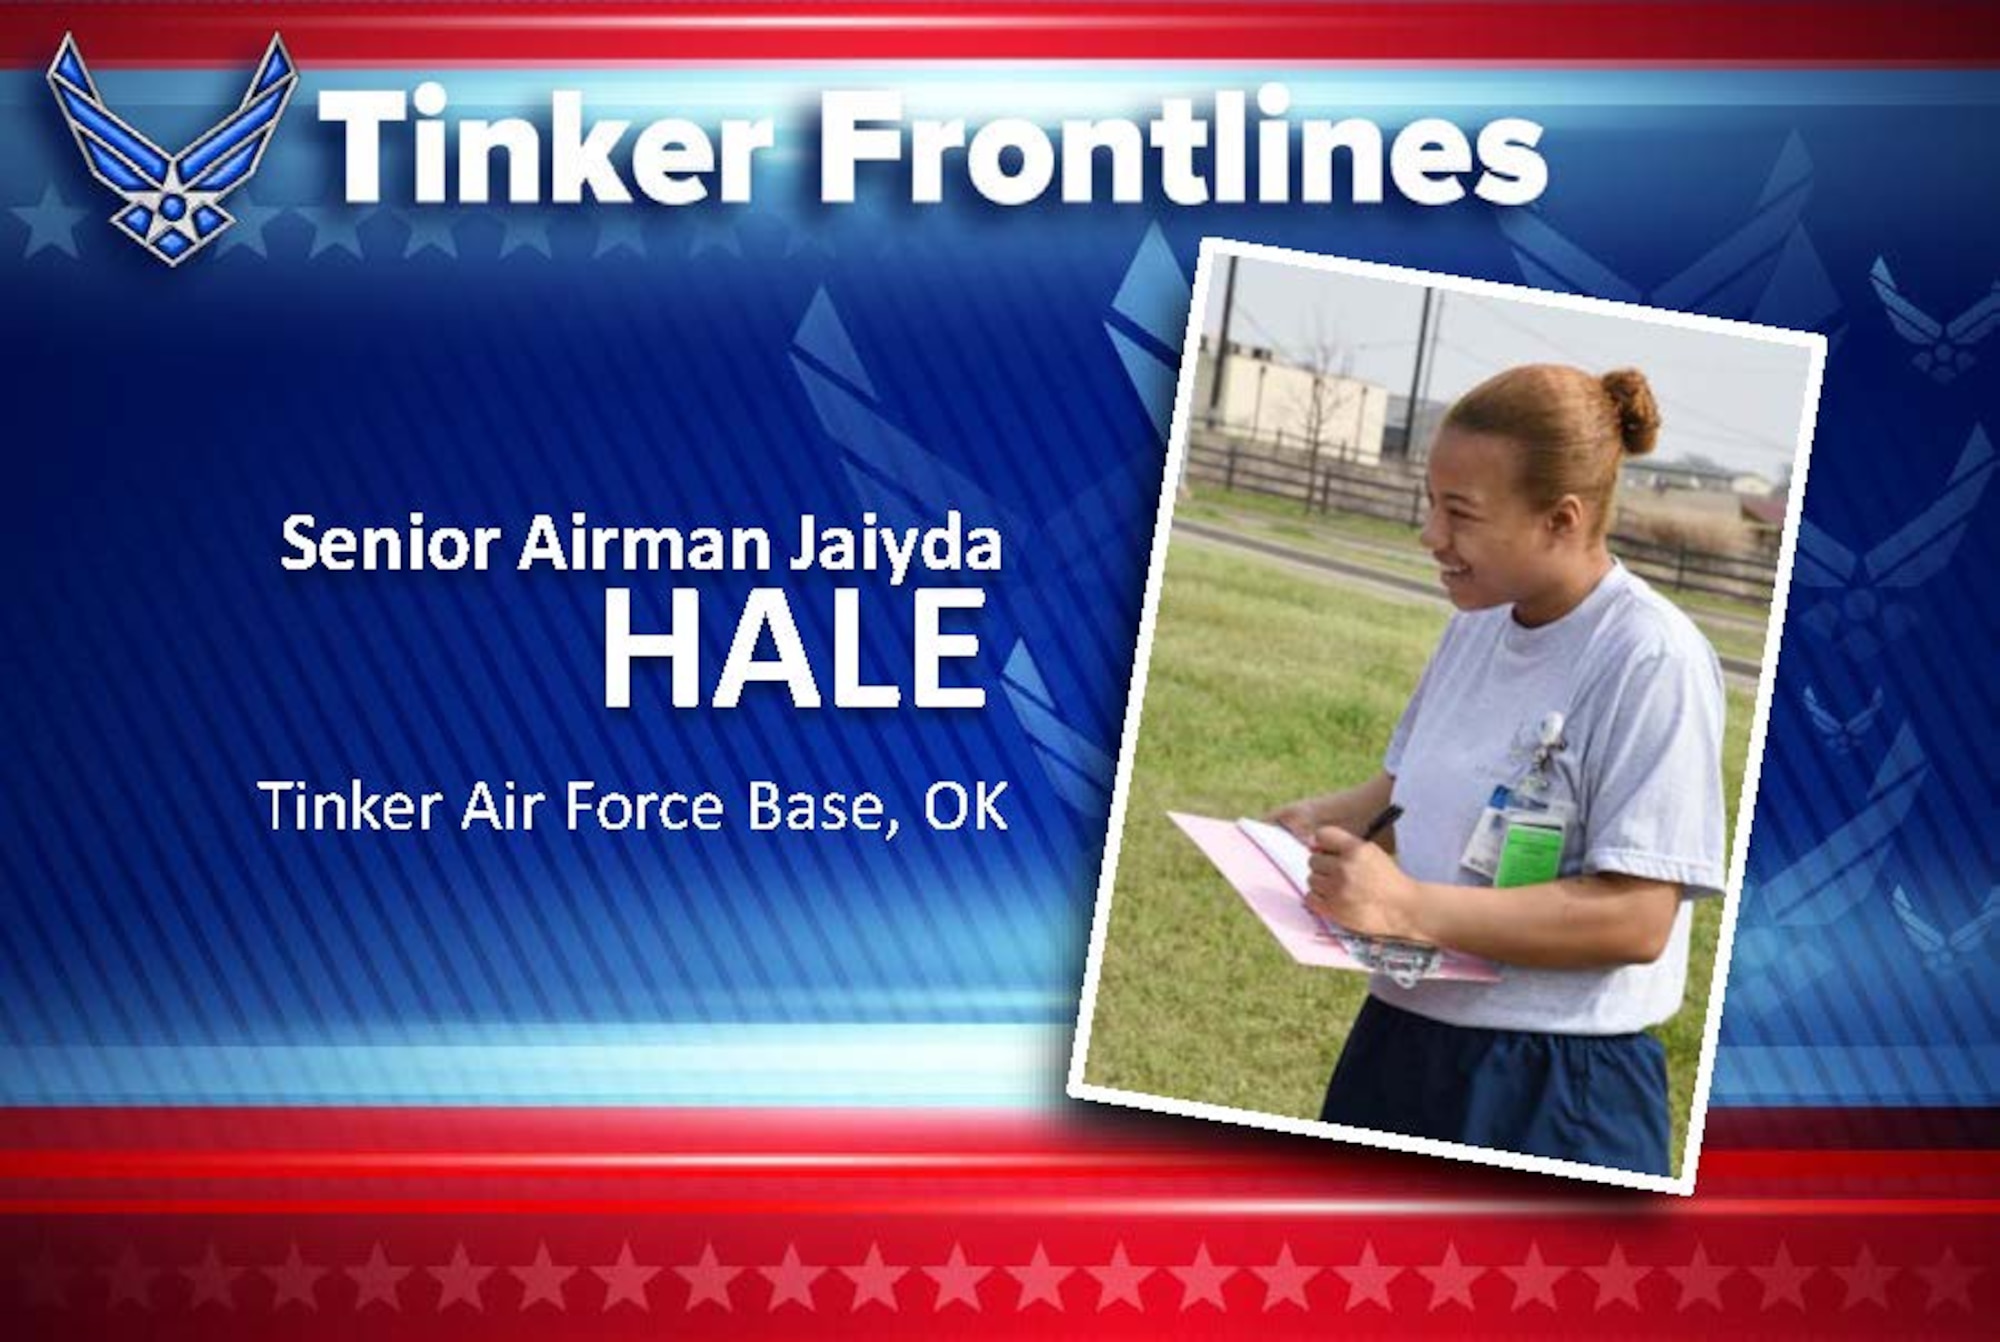 Senior Airman Jaiyda Hale, a lab technician with the 72nd Medical Support Squadron, is originally from Columbus, Ohio, and has served in the U.S. Air Force for two years.